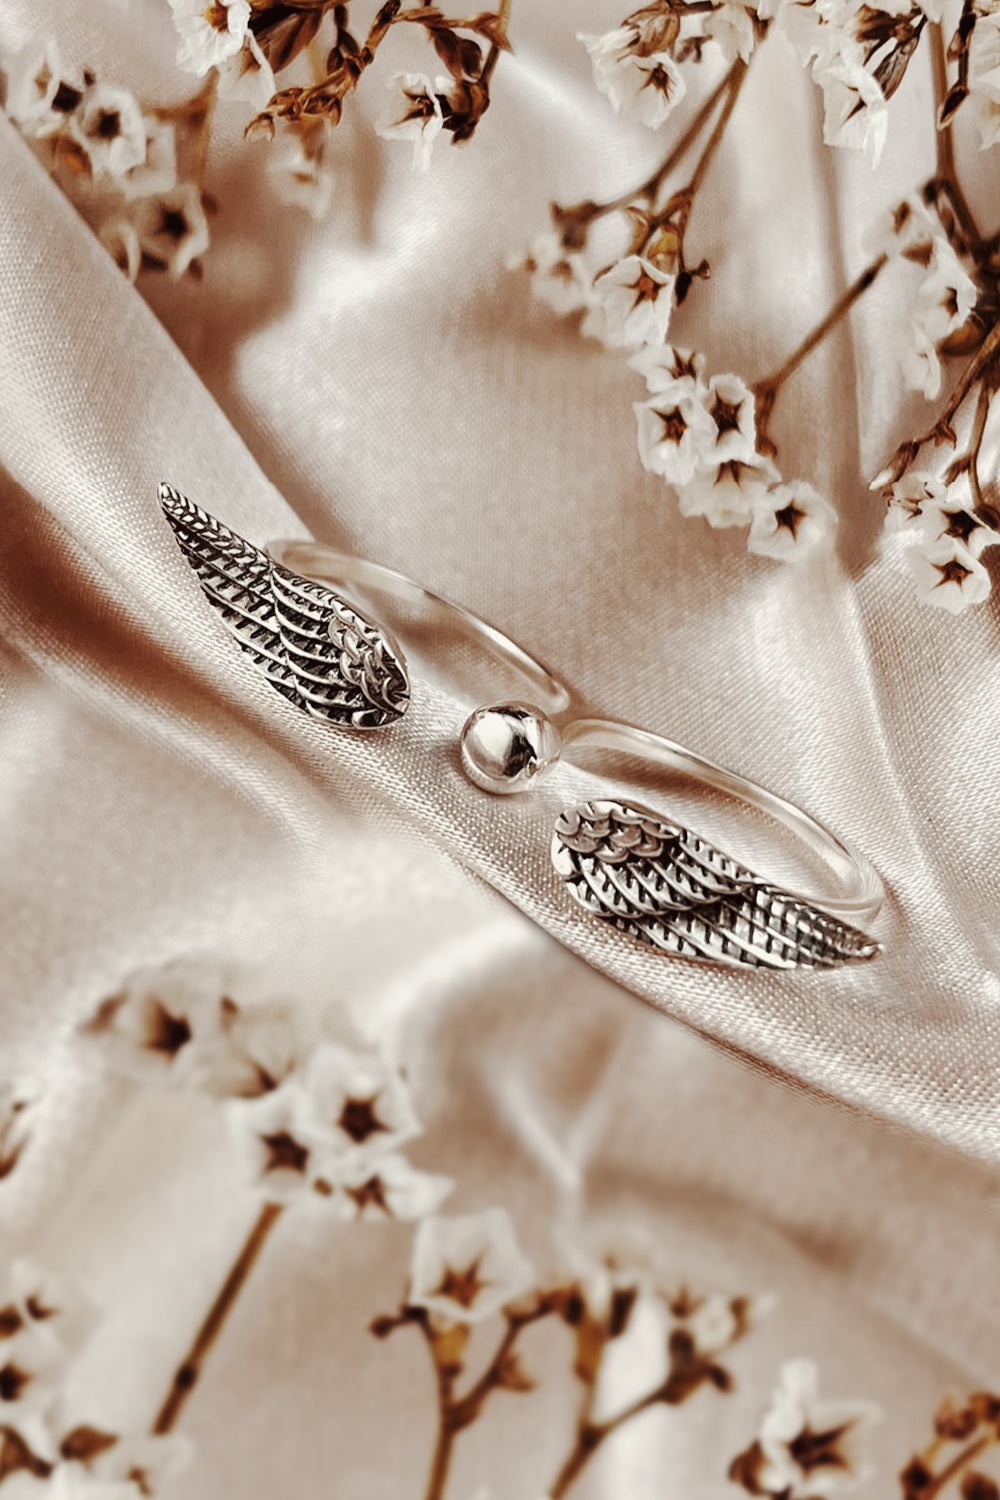 Wings Two Finger Ring Sterling Silver